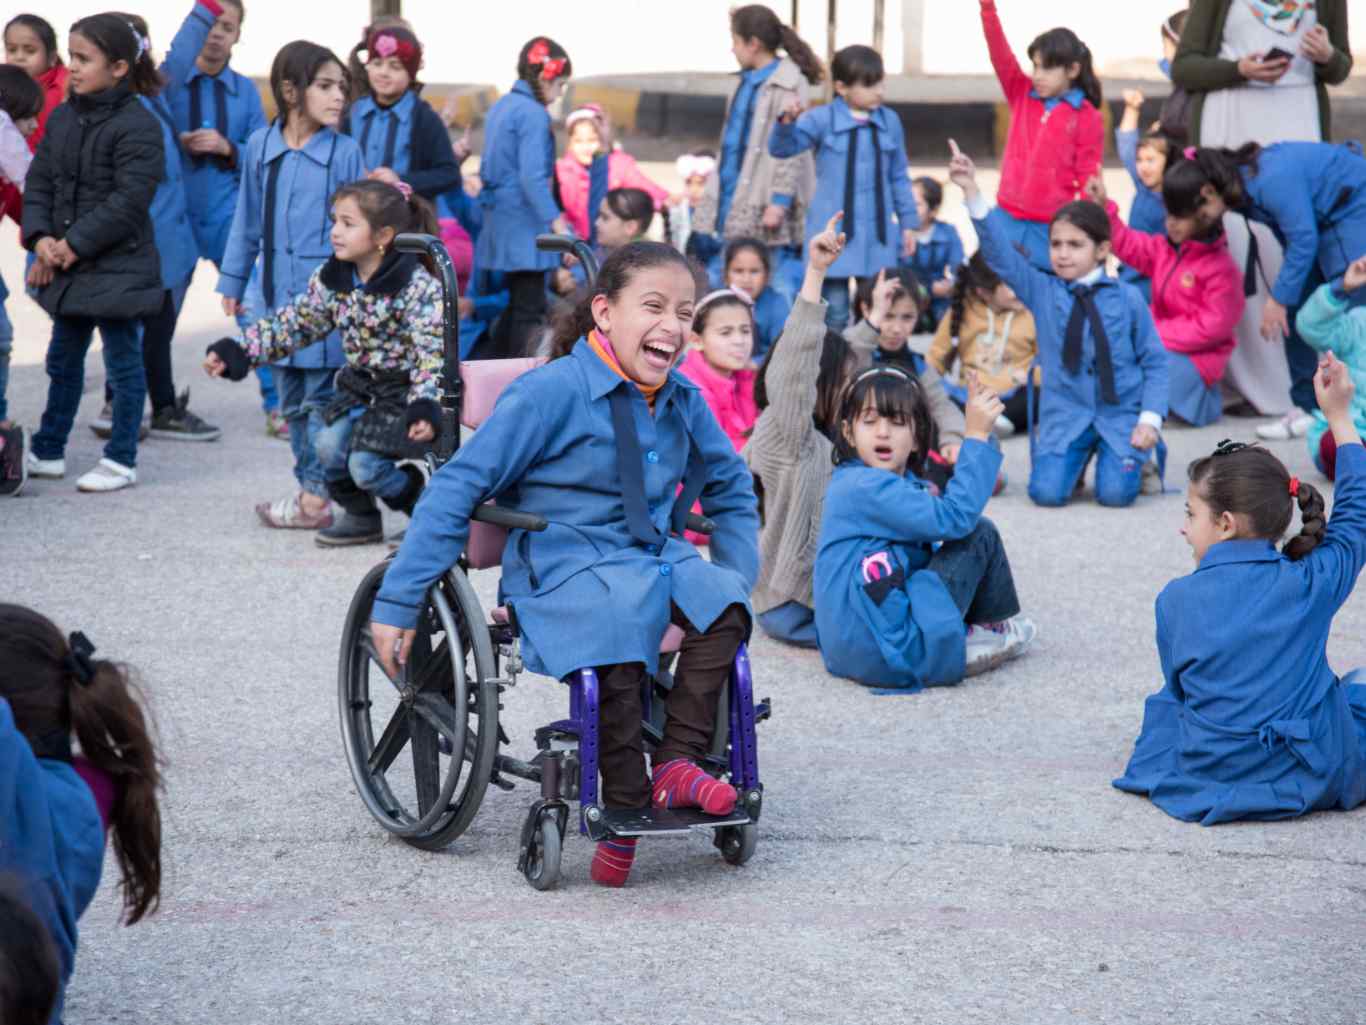 Children in a wheelchair are laughing and playing around.